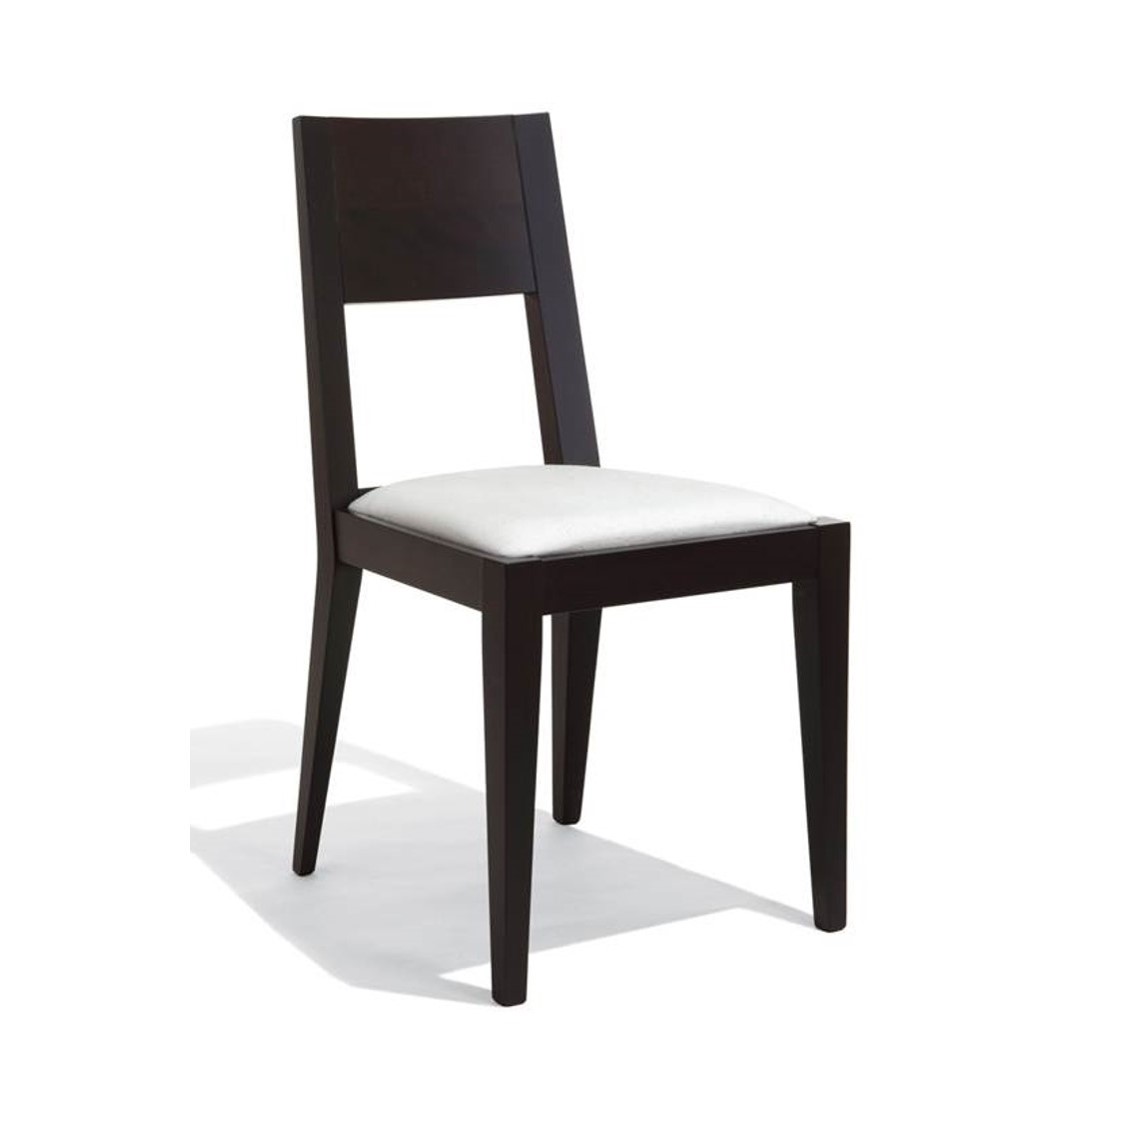 The Alex side chair adds a touch of class to any fine dining or restaurant environment. The frame can be stained to the finish of your choice.